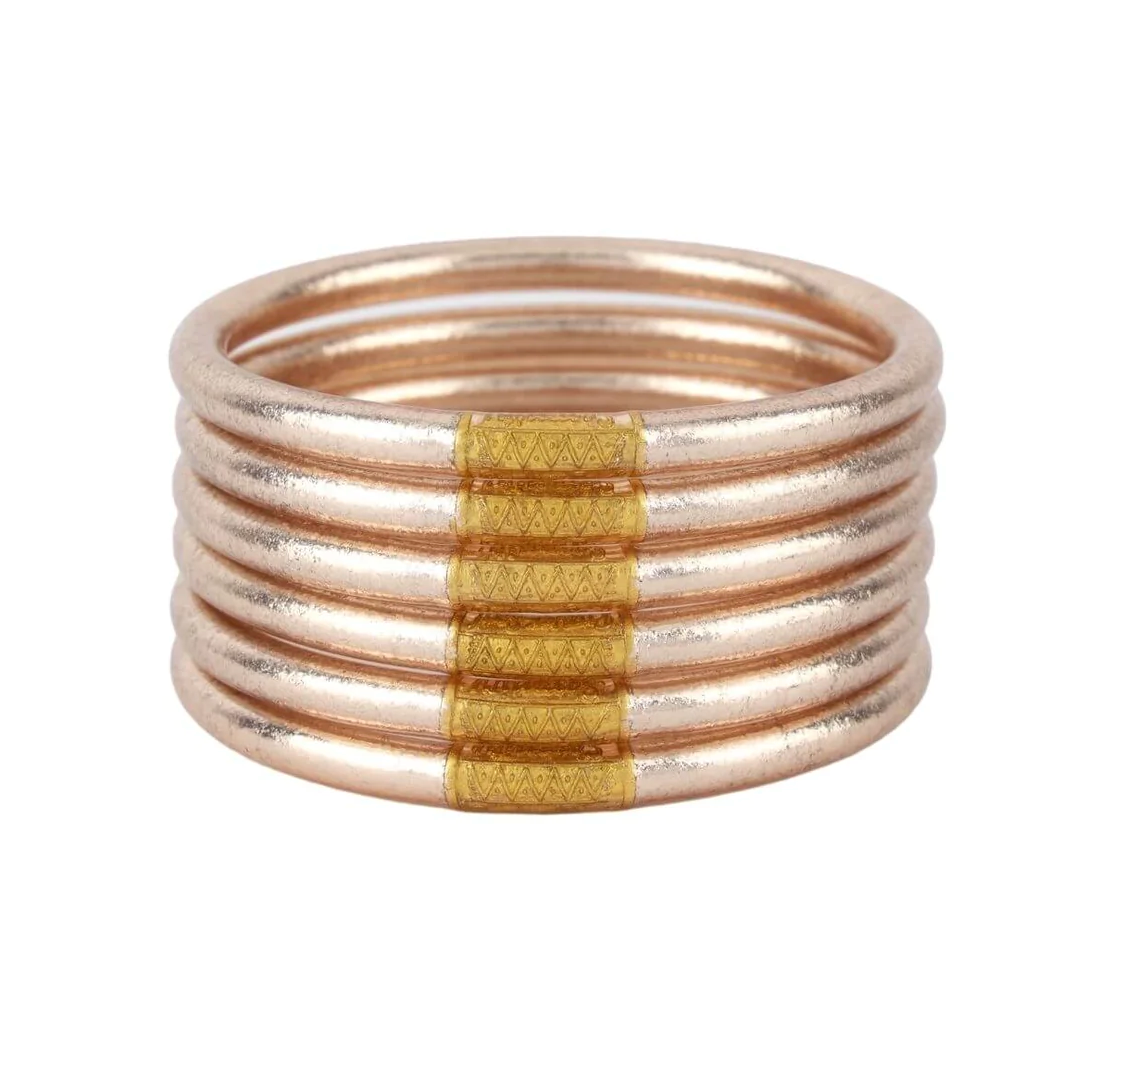 BUDHAGIRL CHAMPAGNE ALL WEATHER BANGLES: 6 PACK